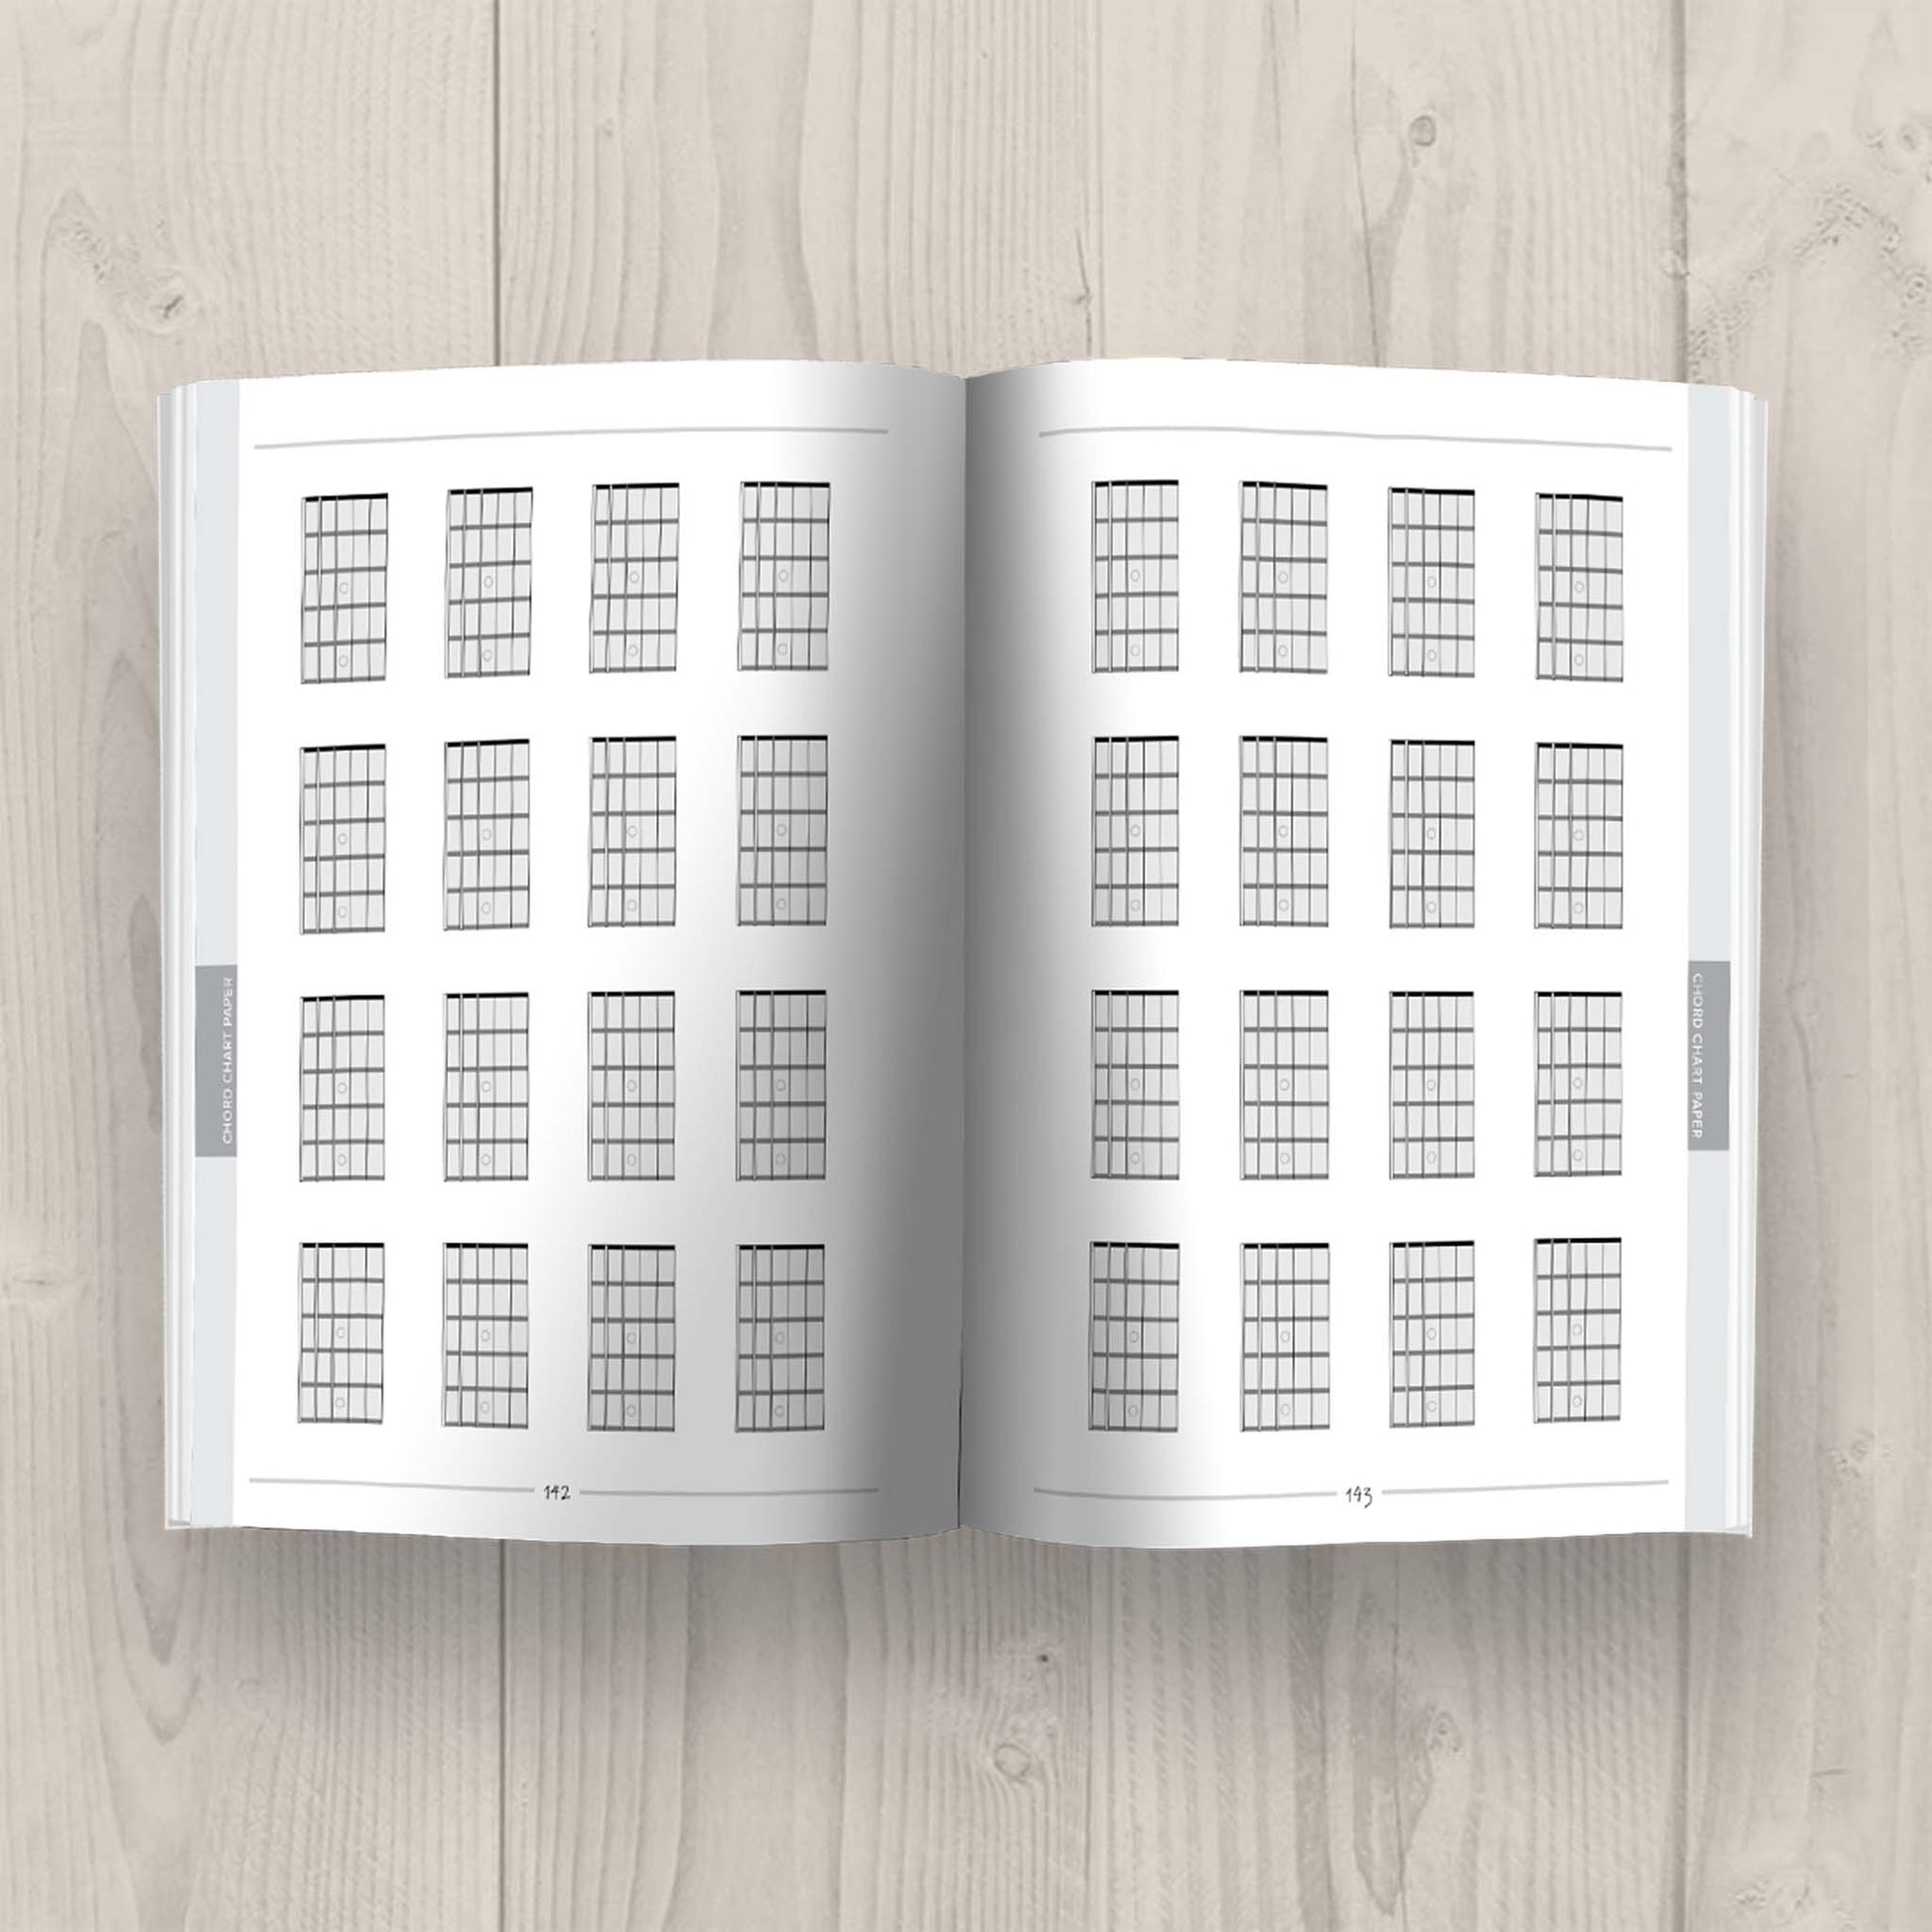 Guitar Sheets Collection Book from The Missing Method for Guitar. Book interior displaying pages 142-143 of blank chord chart paper